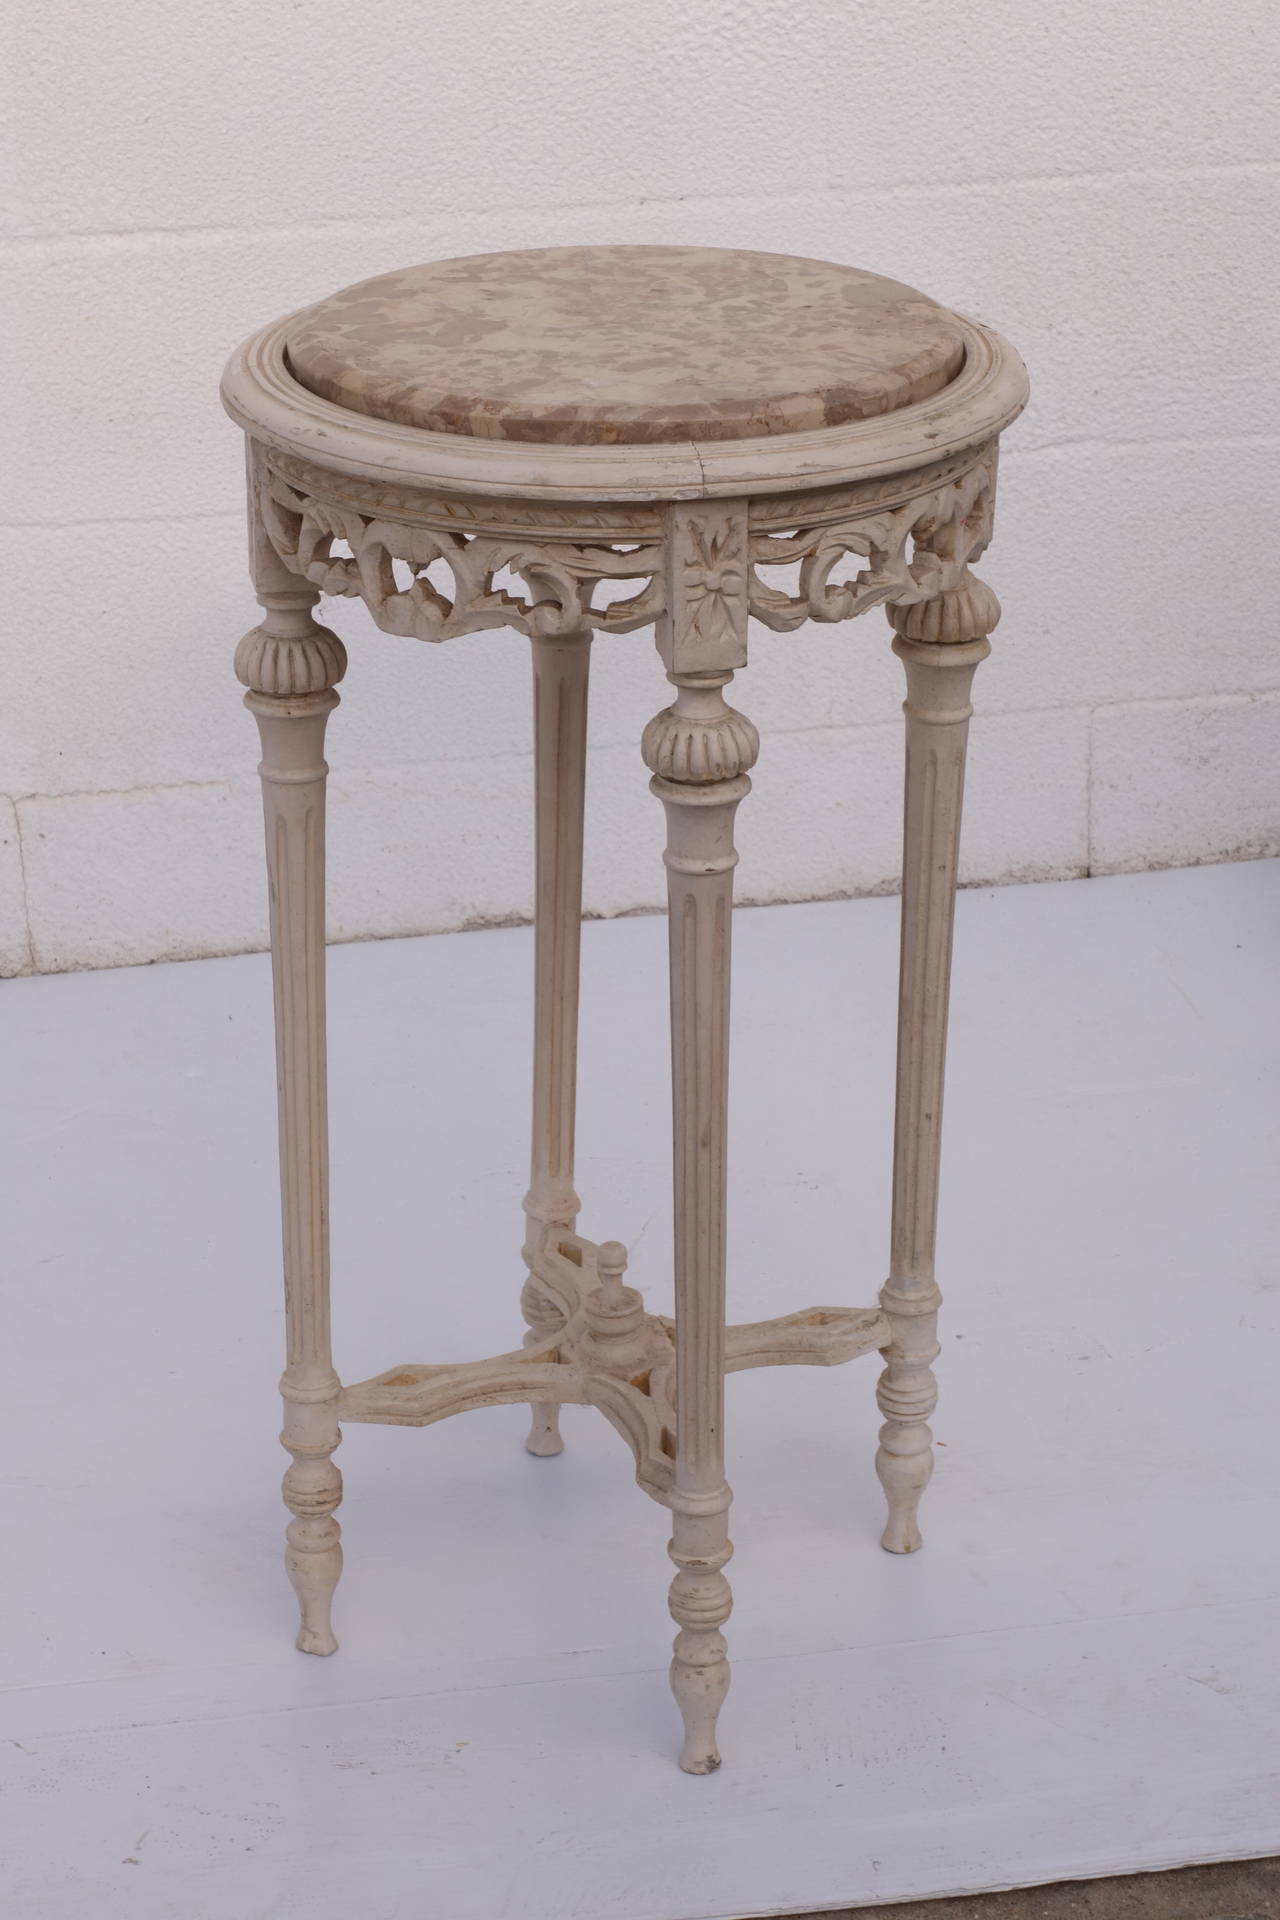 Limed finish on base done at a later date. Marble top on intricately carved table base. Please contact for current availability.